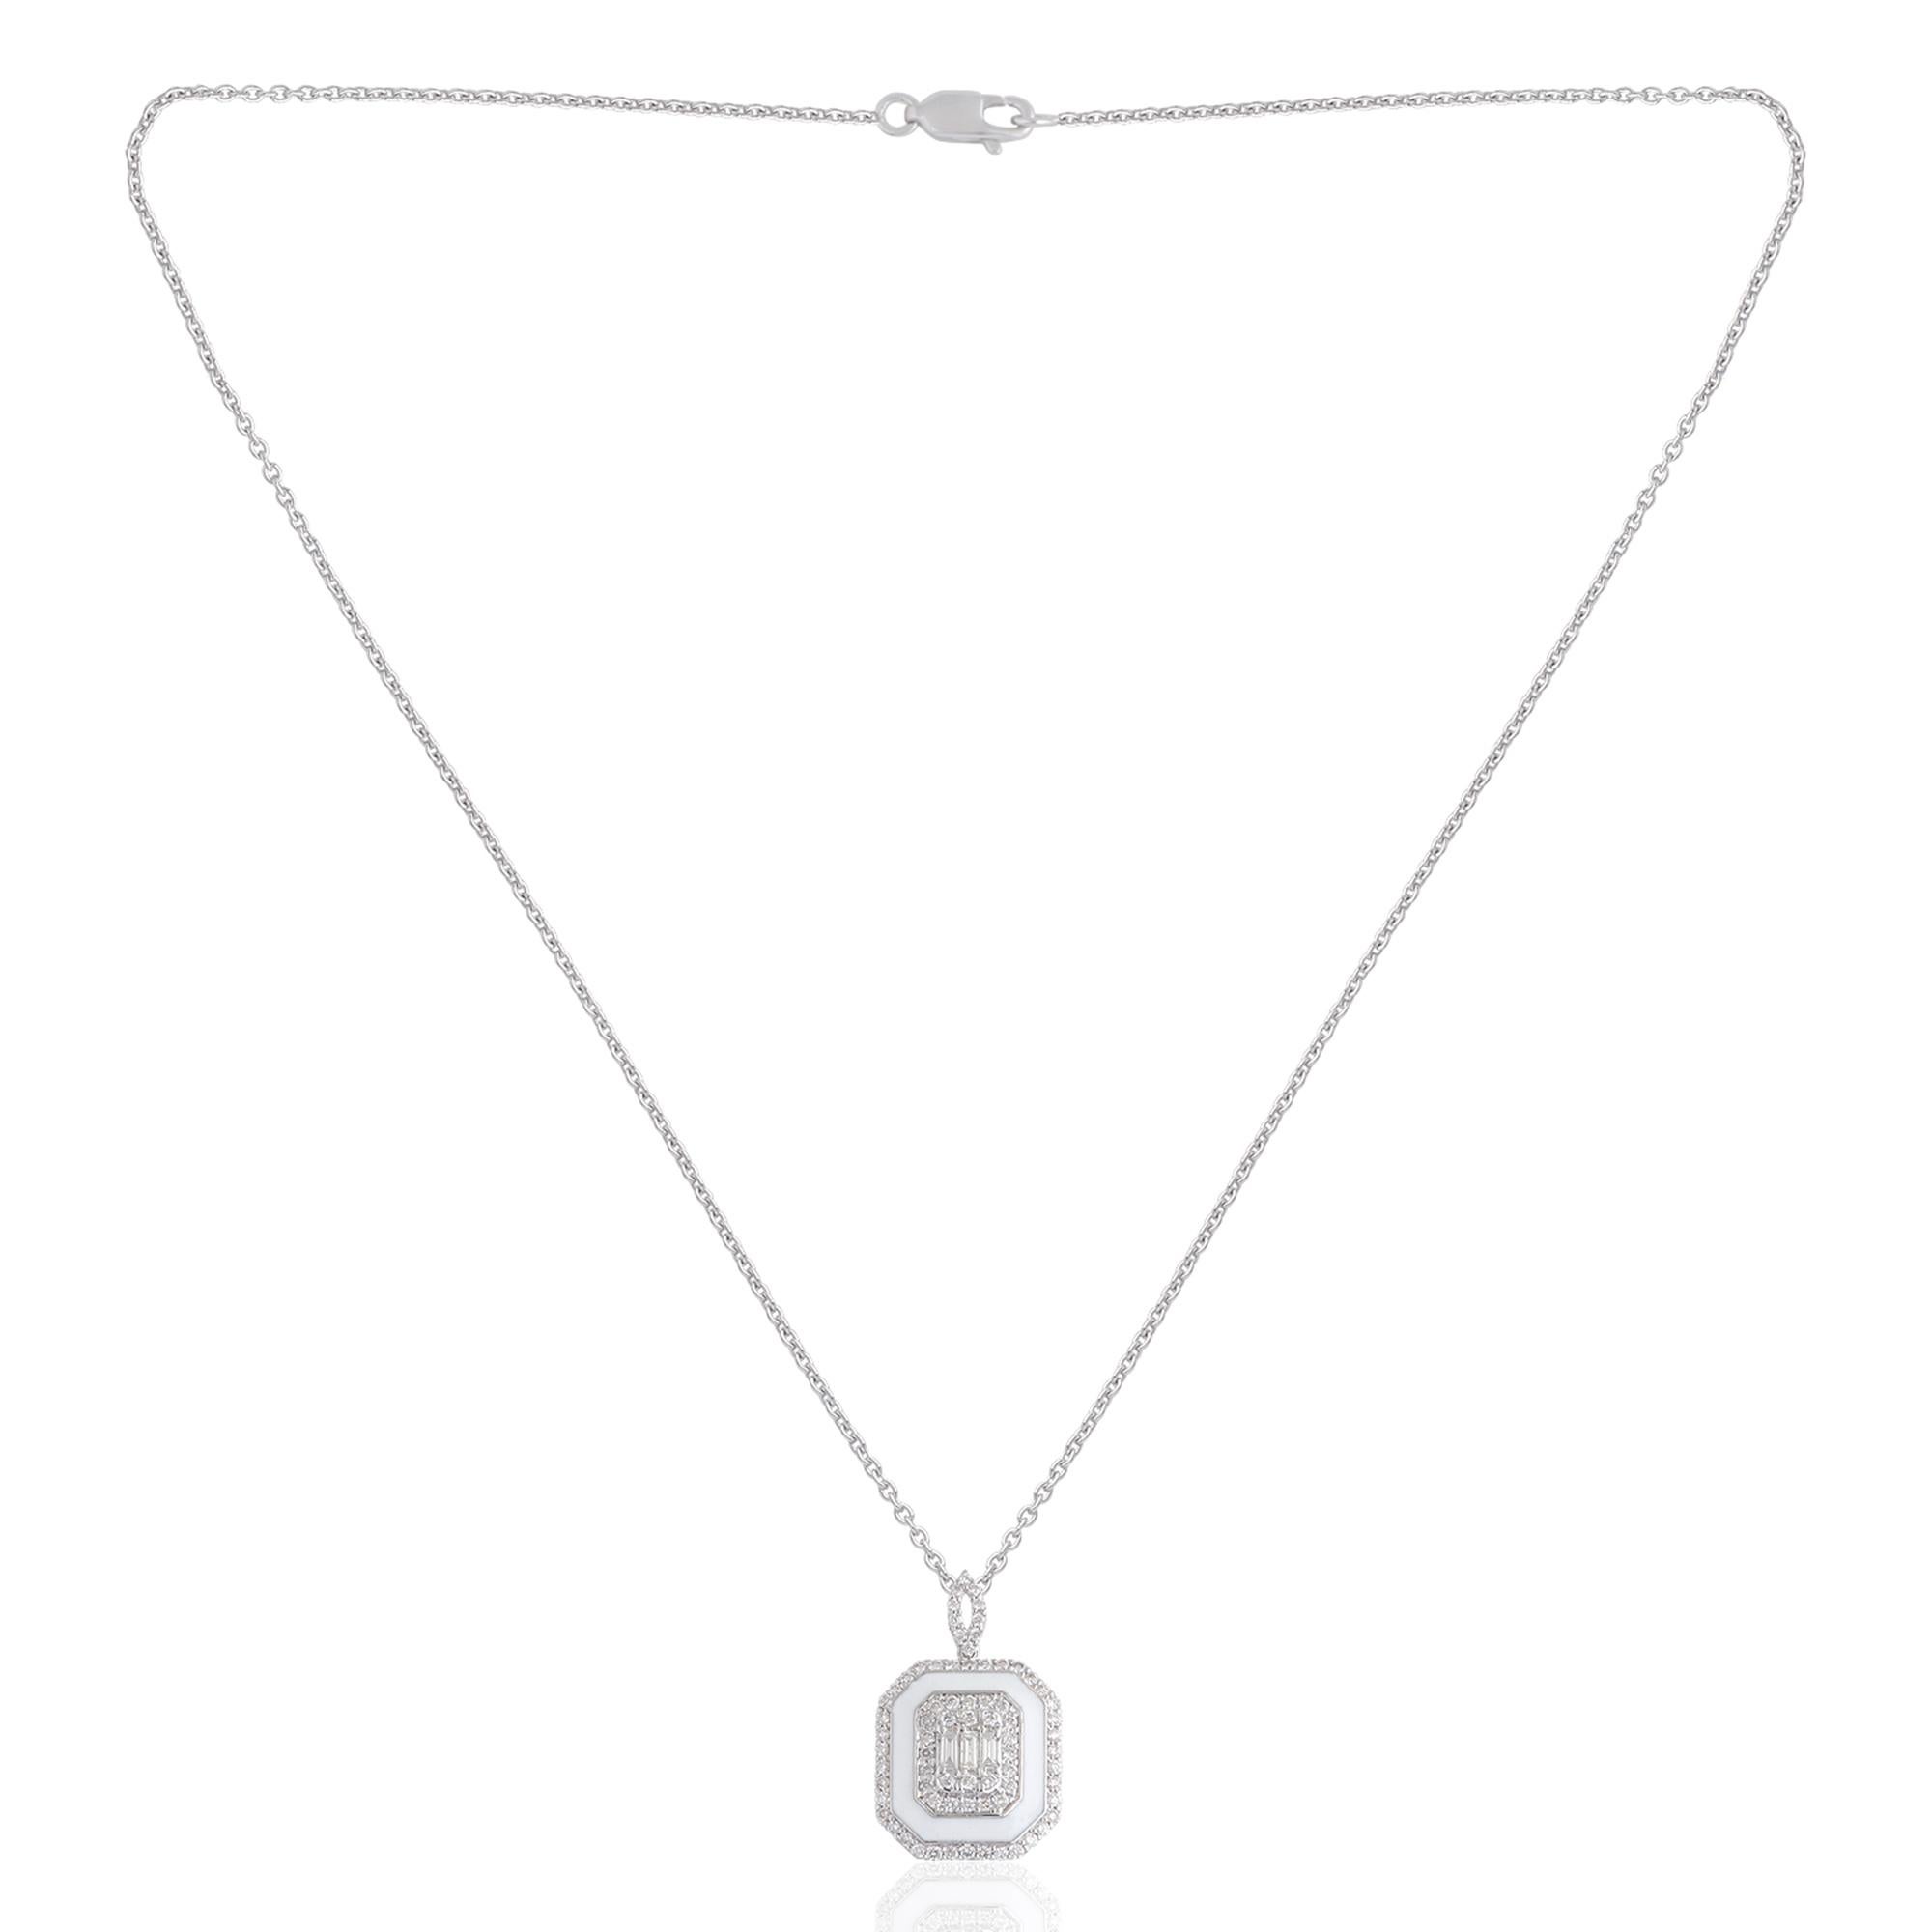 The 0.55 Carat Diamond Pave Charm White Enamel Pendant Necklace in 18 Karat White Gold is more than just a piece of jewelry; it is a symbol of sophistication, grace, and refined beauty.

Item Code :- CN-40061
Gross Wt. :- 5.82 gm
18k White Gold Wt.